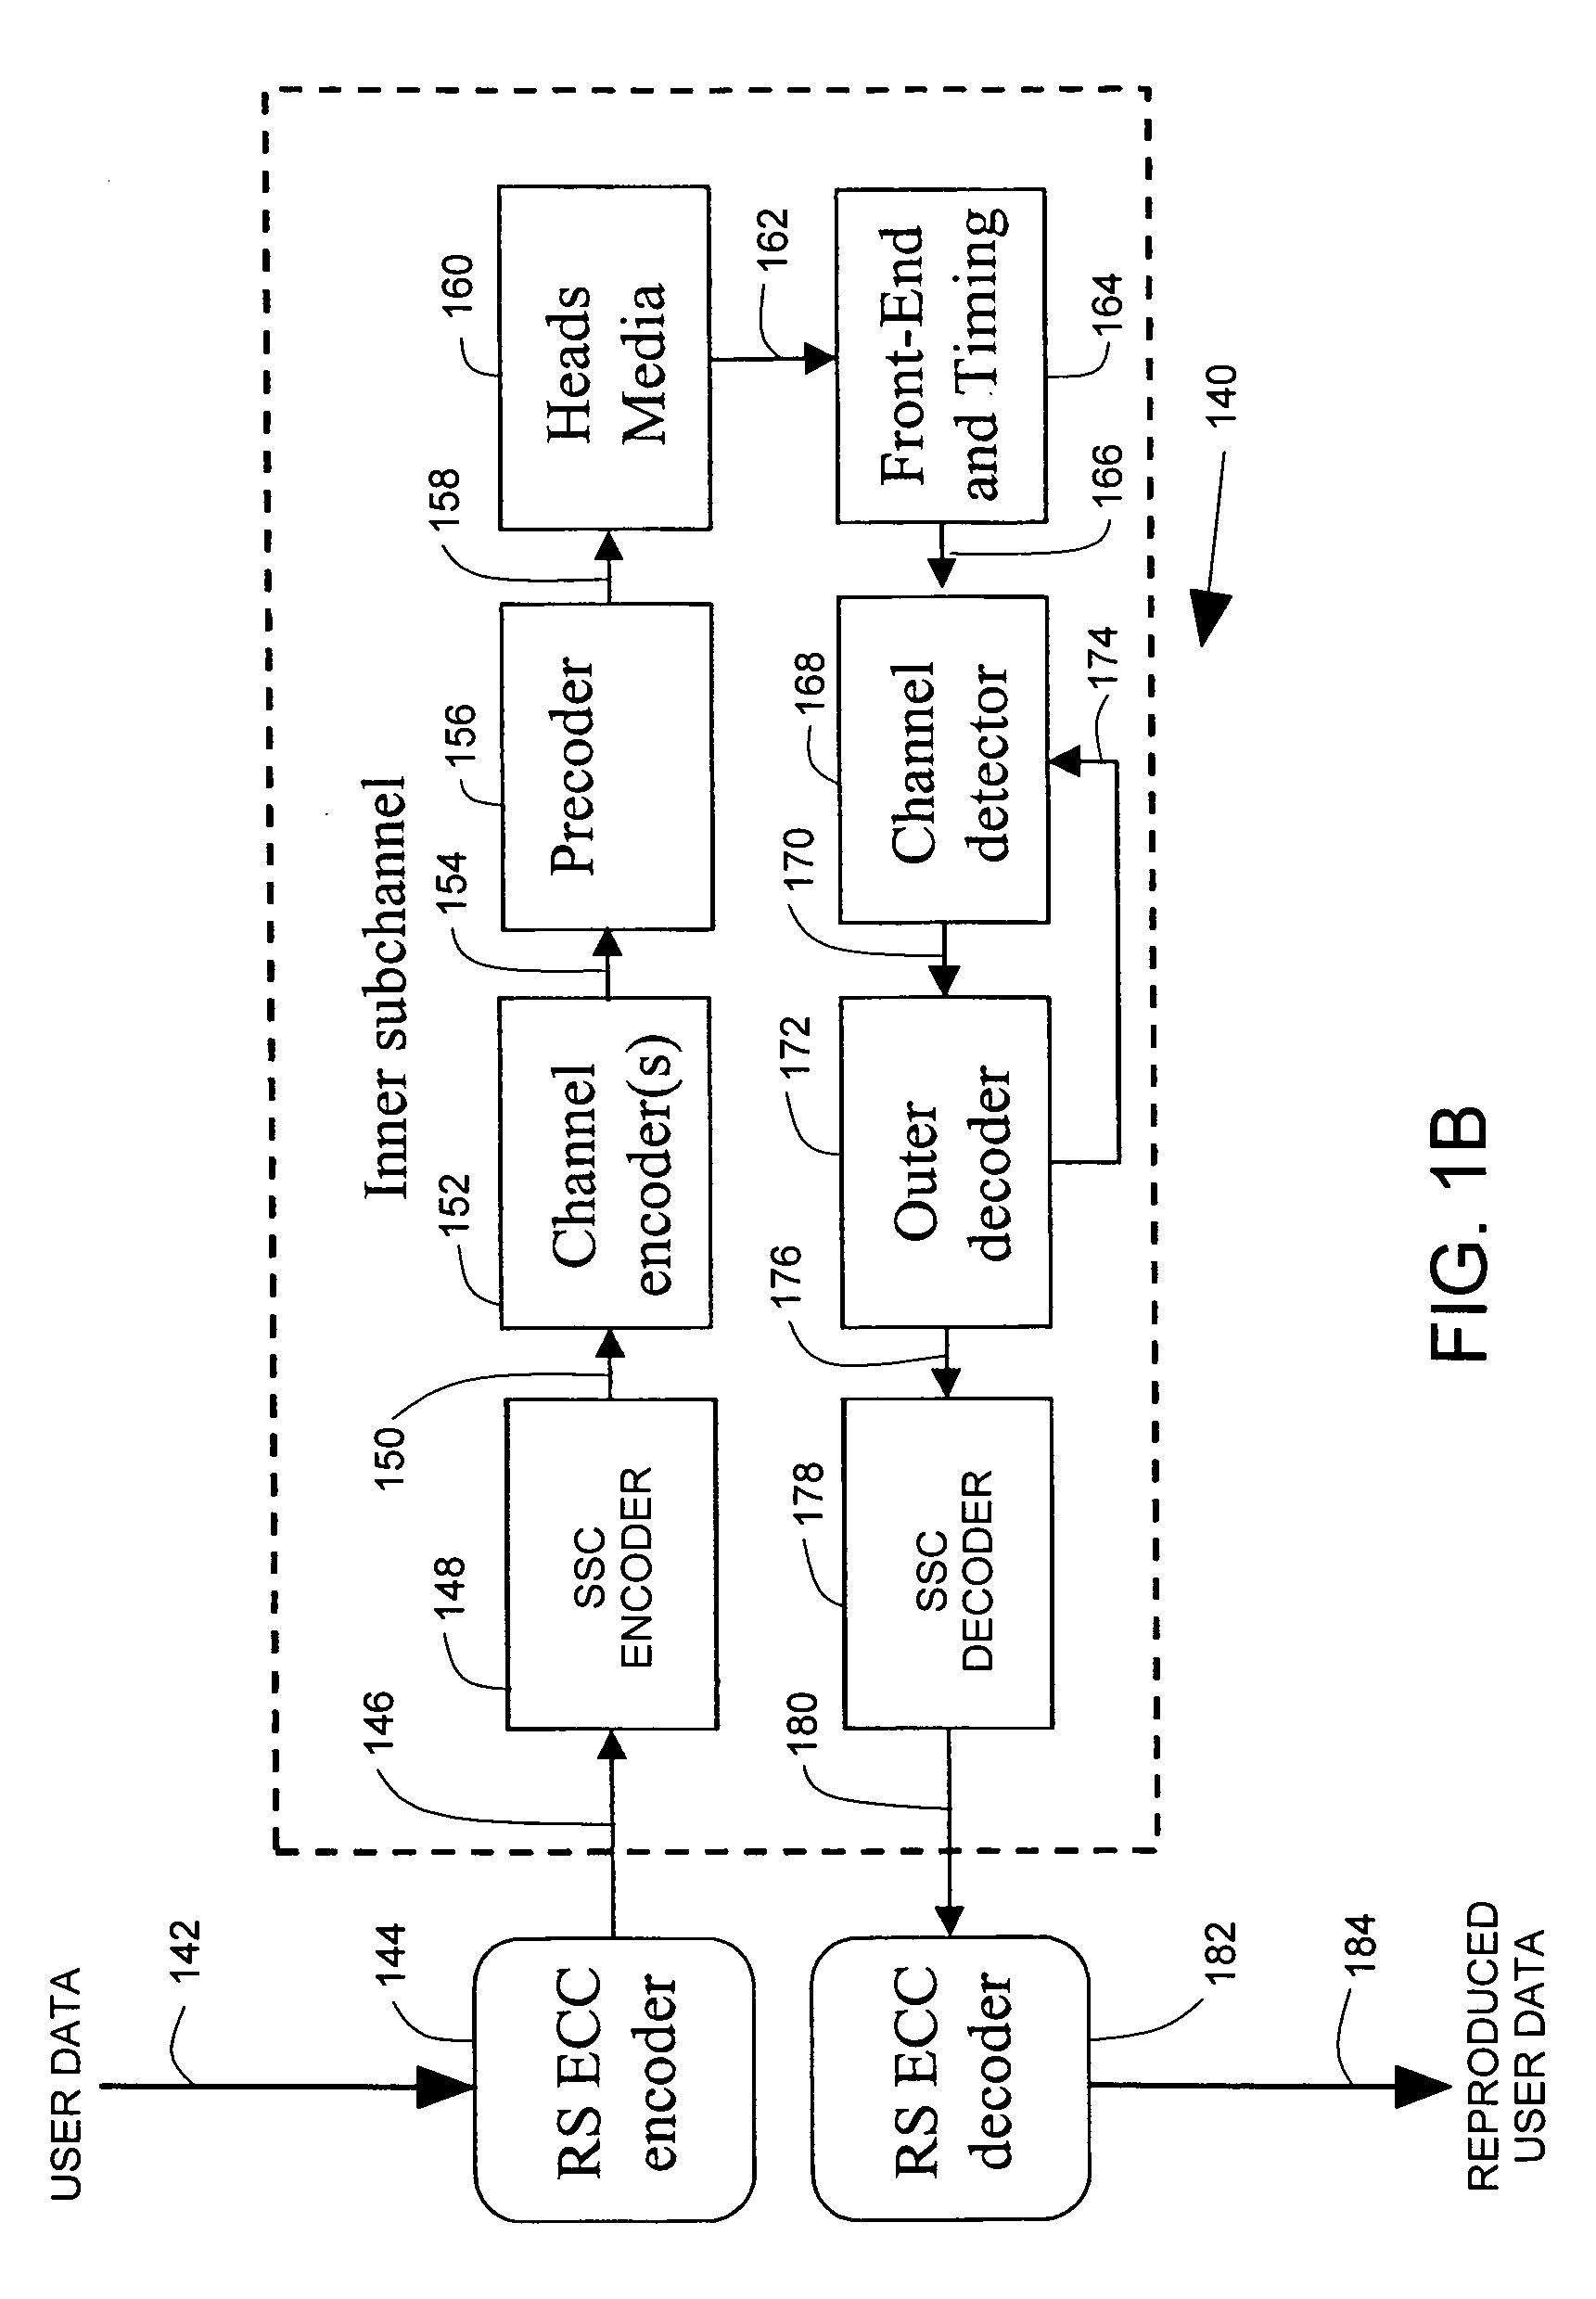 Combining spectral shaping with turbo coding in a channel coding system